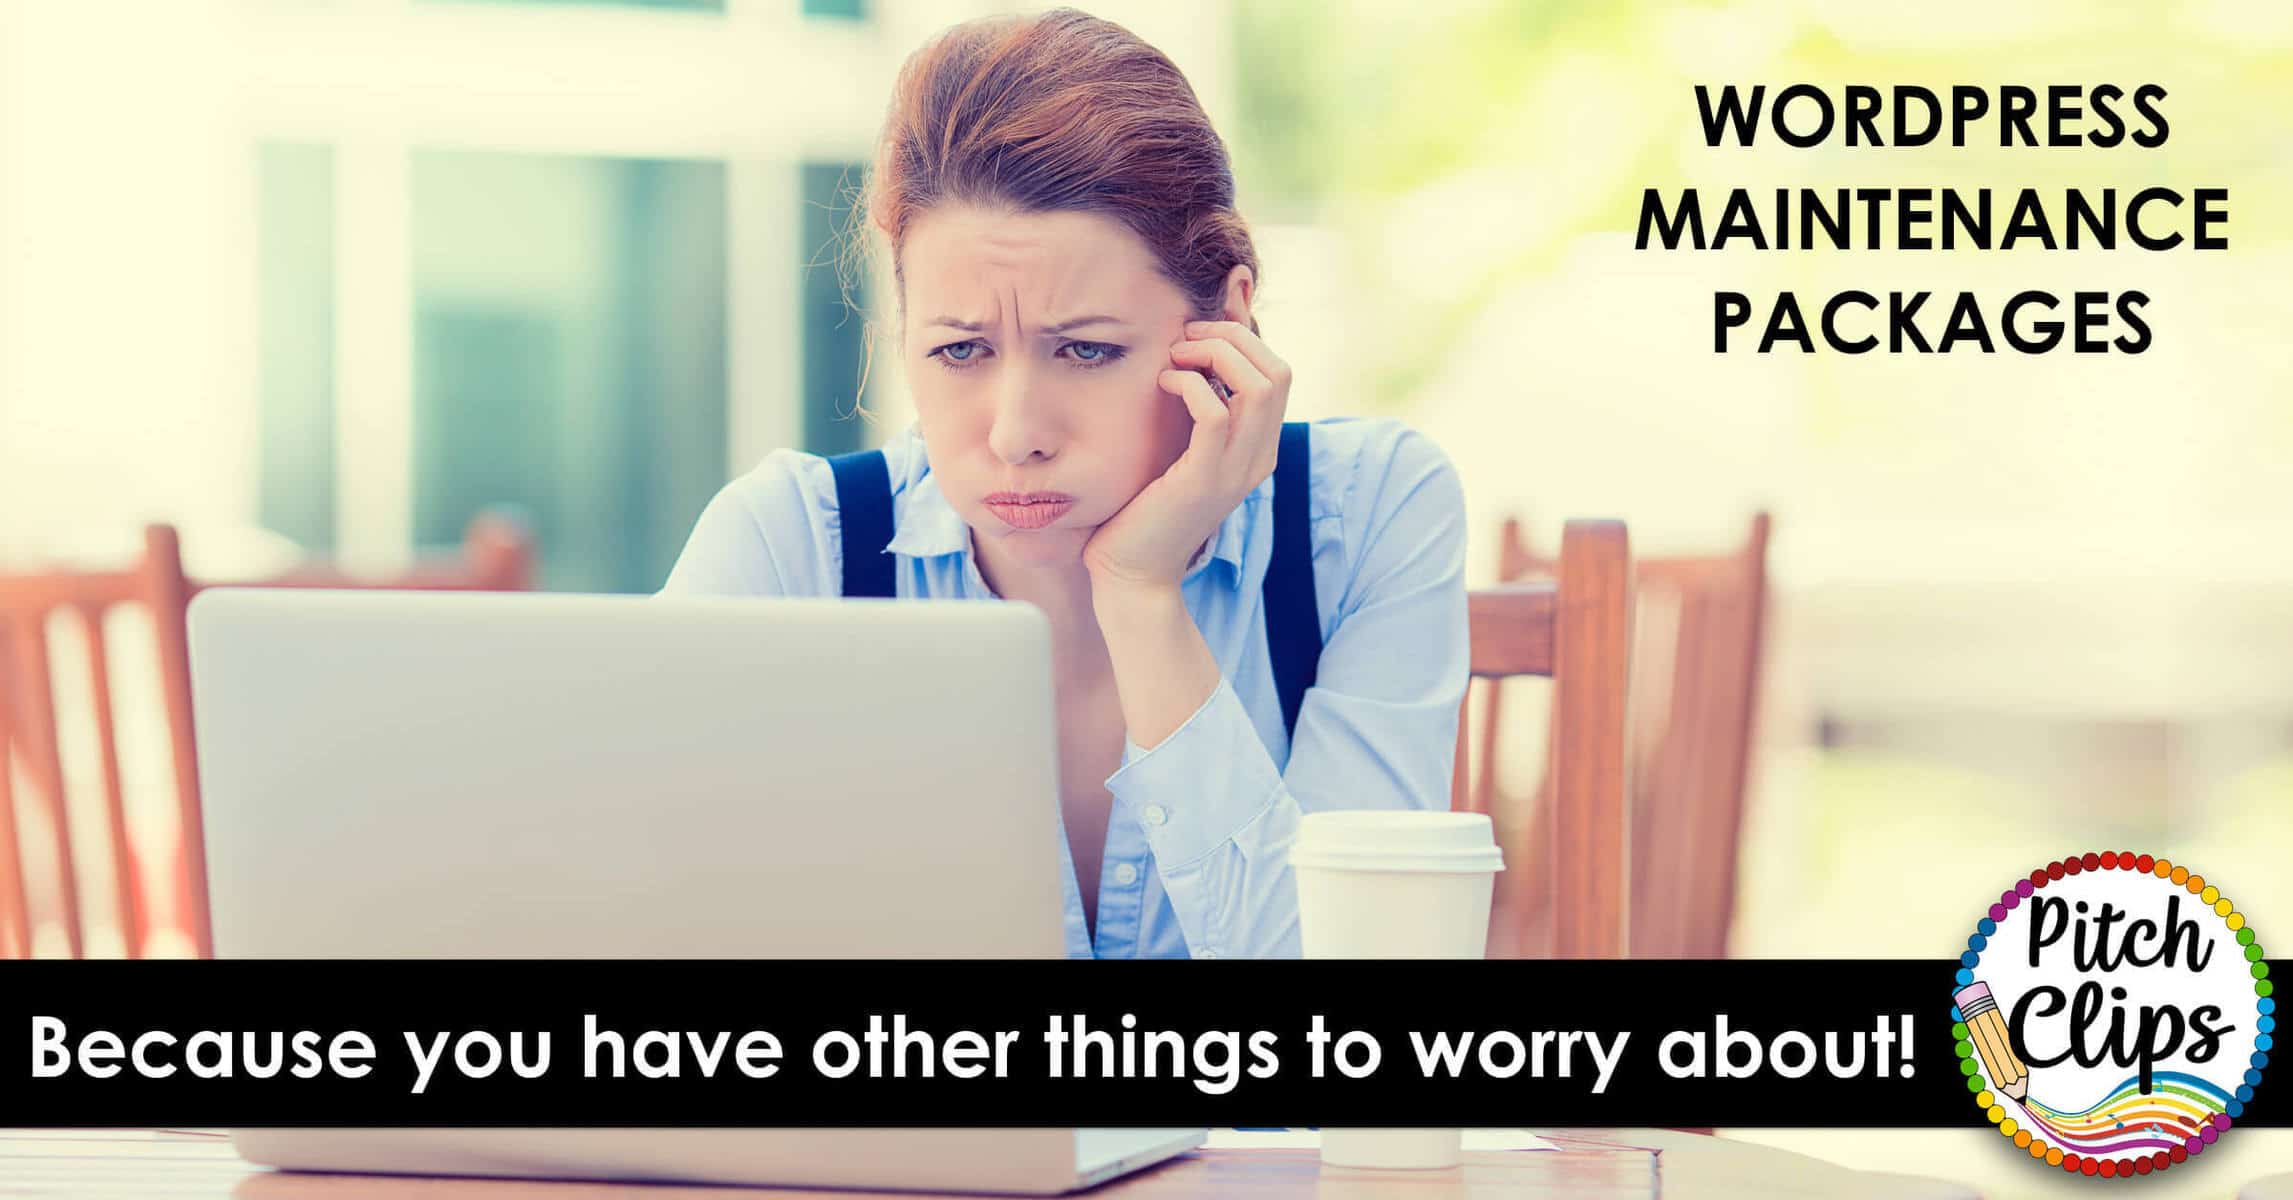 person looking frustrated looking at a computer.  text: WordPress maintenance packages - because you have other things to worry about